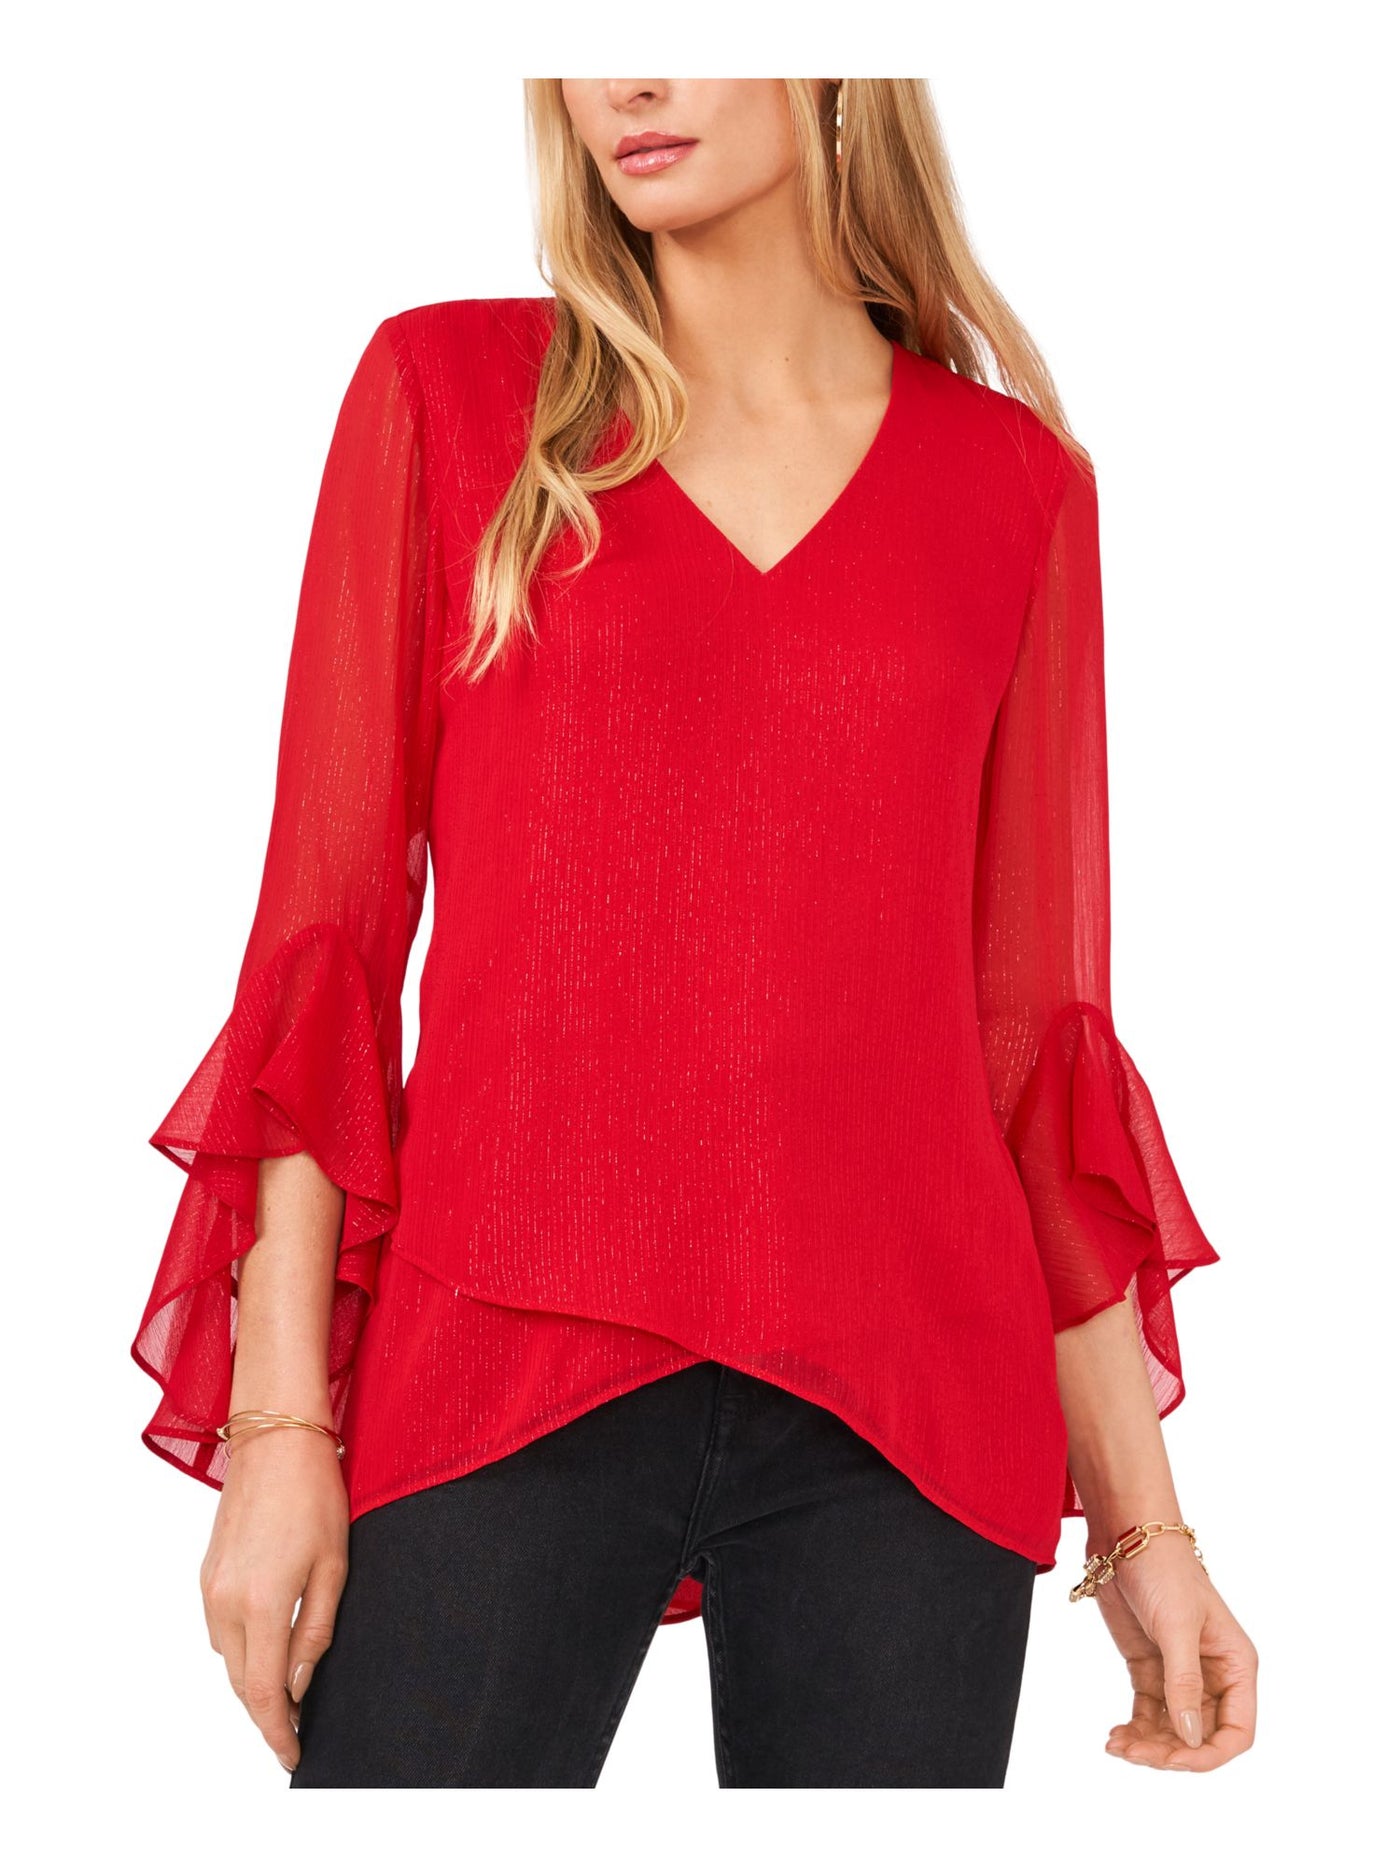 VINCE CAMUTO Womens Red Sheer Asymmetrical Front Hem Lined Flutter Sleeve V Neck Wear To Work Top XS